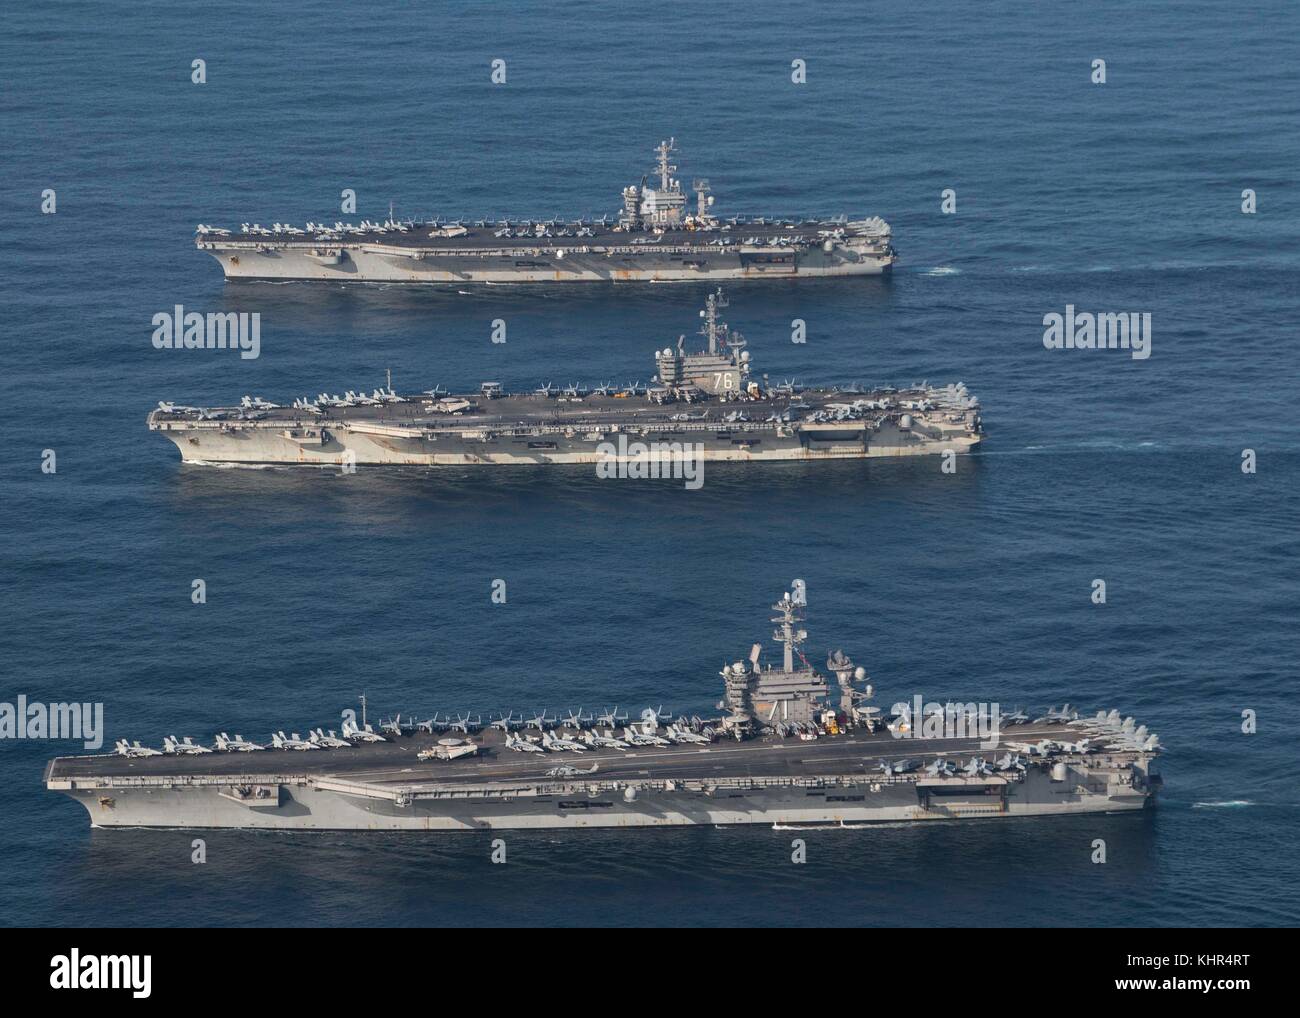 The U.S. Navy Nimitz-class aircraft carriers (top to bottom) USS Nimitz, USS Ronald Reagan, and USS Theodore Roosevelt steam in formation November 12, 2017 in the Pacific Ocean.  (photo by James Griffin via Planetpix) Stock Photo